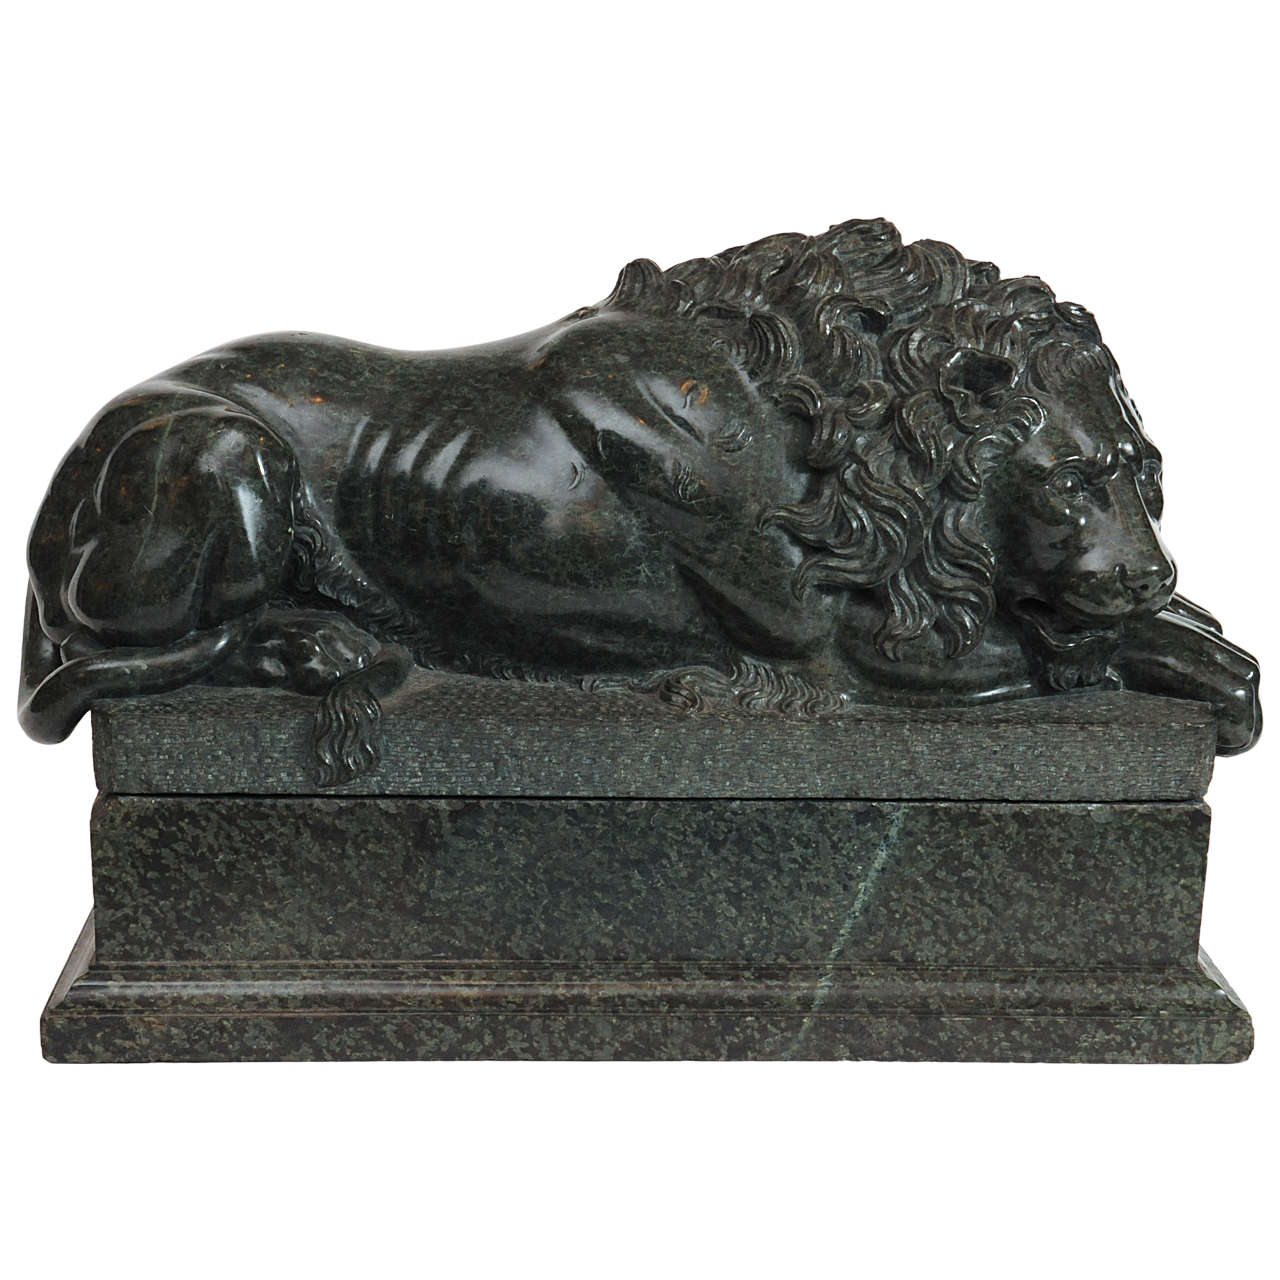 Green Marble Model of a Recumbent Lion For Sale